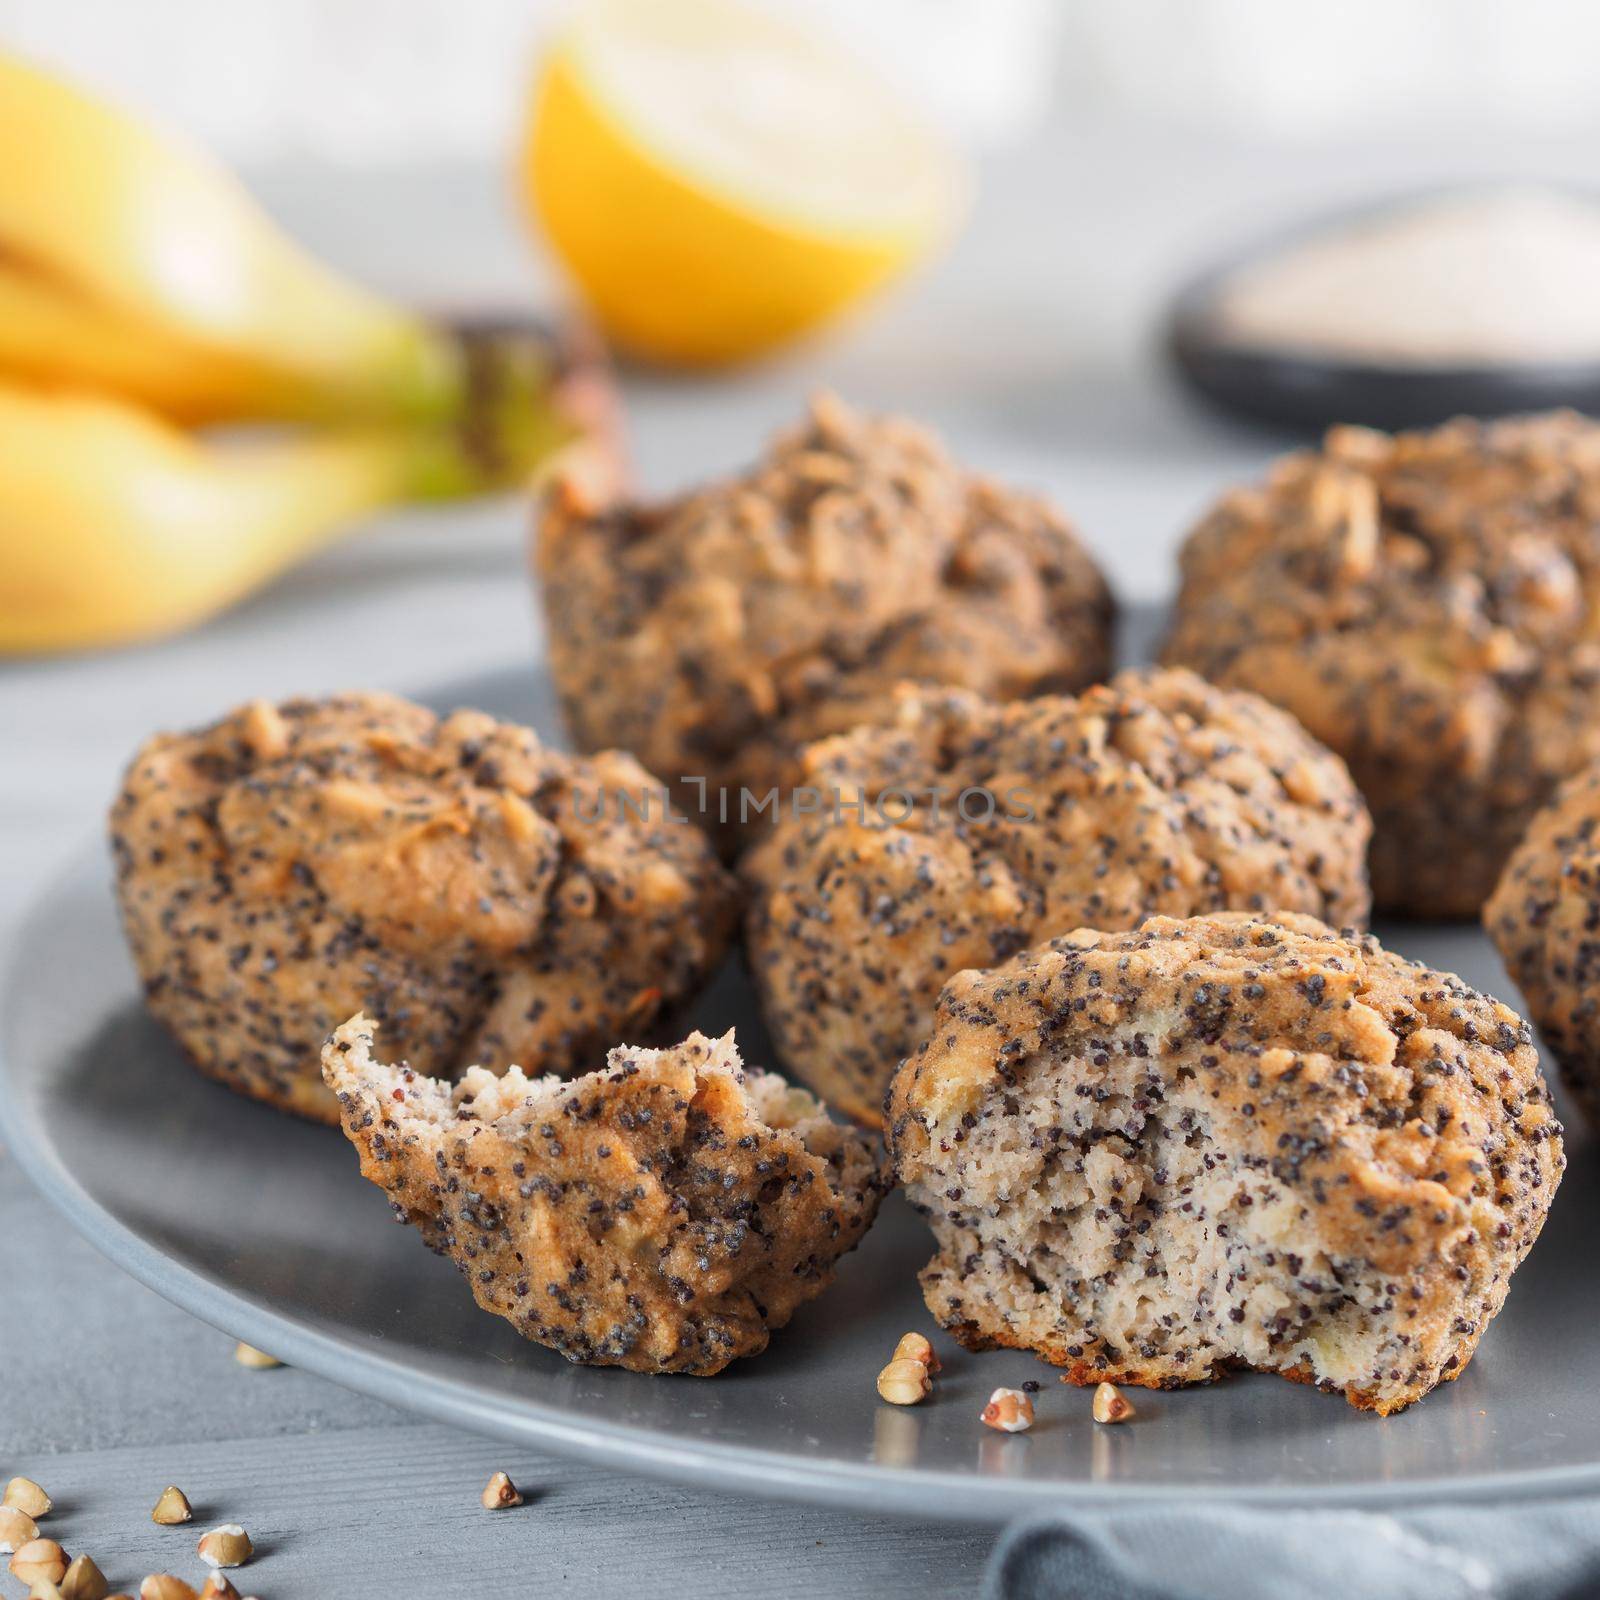 Close-up view of healthy gluten-free homemmade banana muffins with buckwheat flour. Vegan muffins with poppy seeds on gray plate over gray wooden table